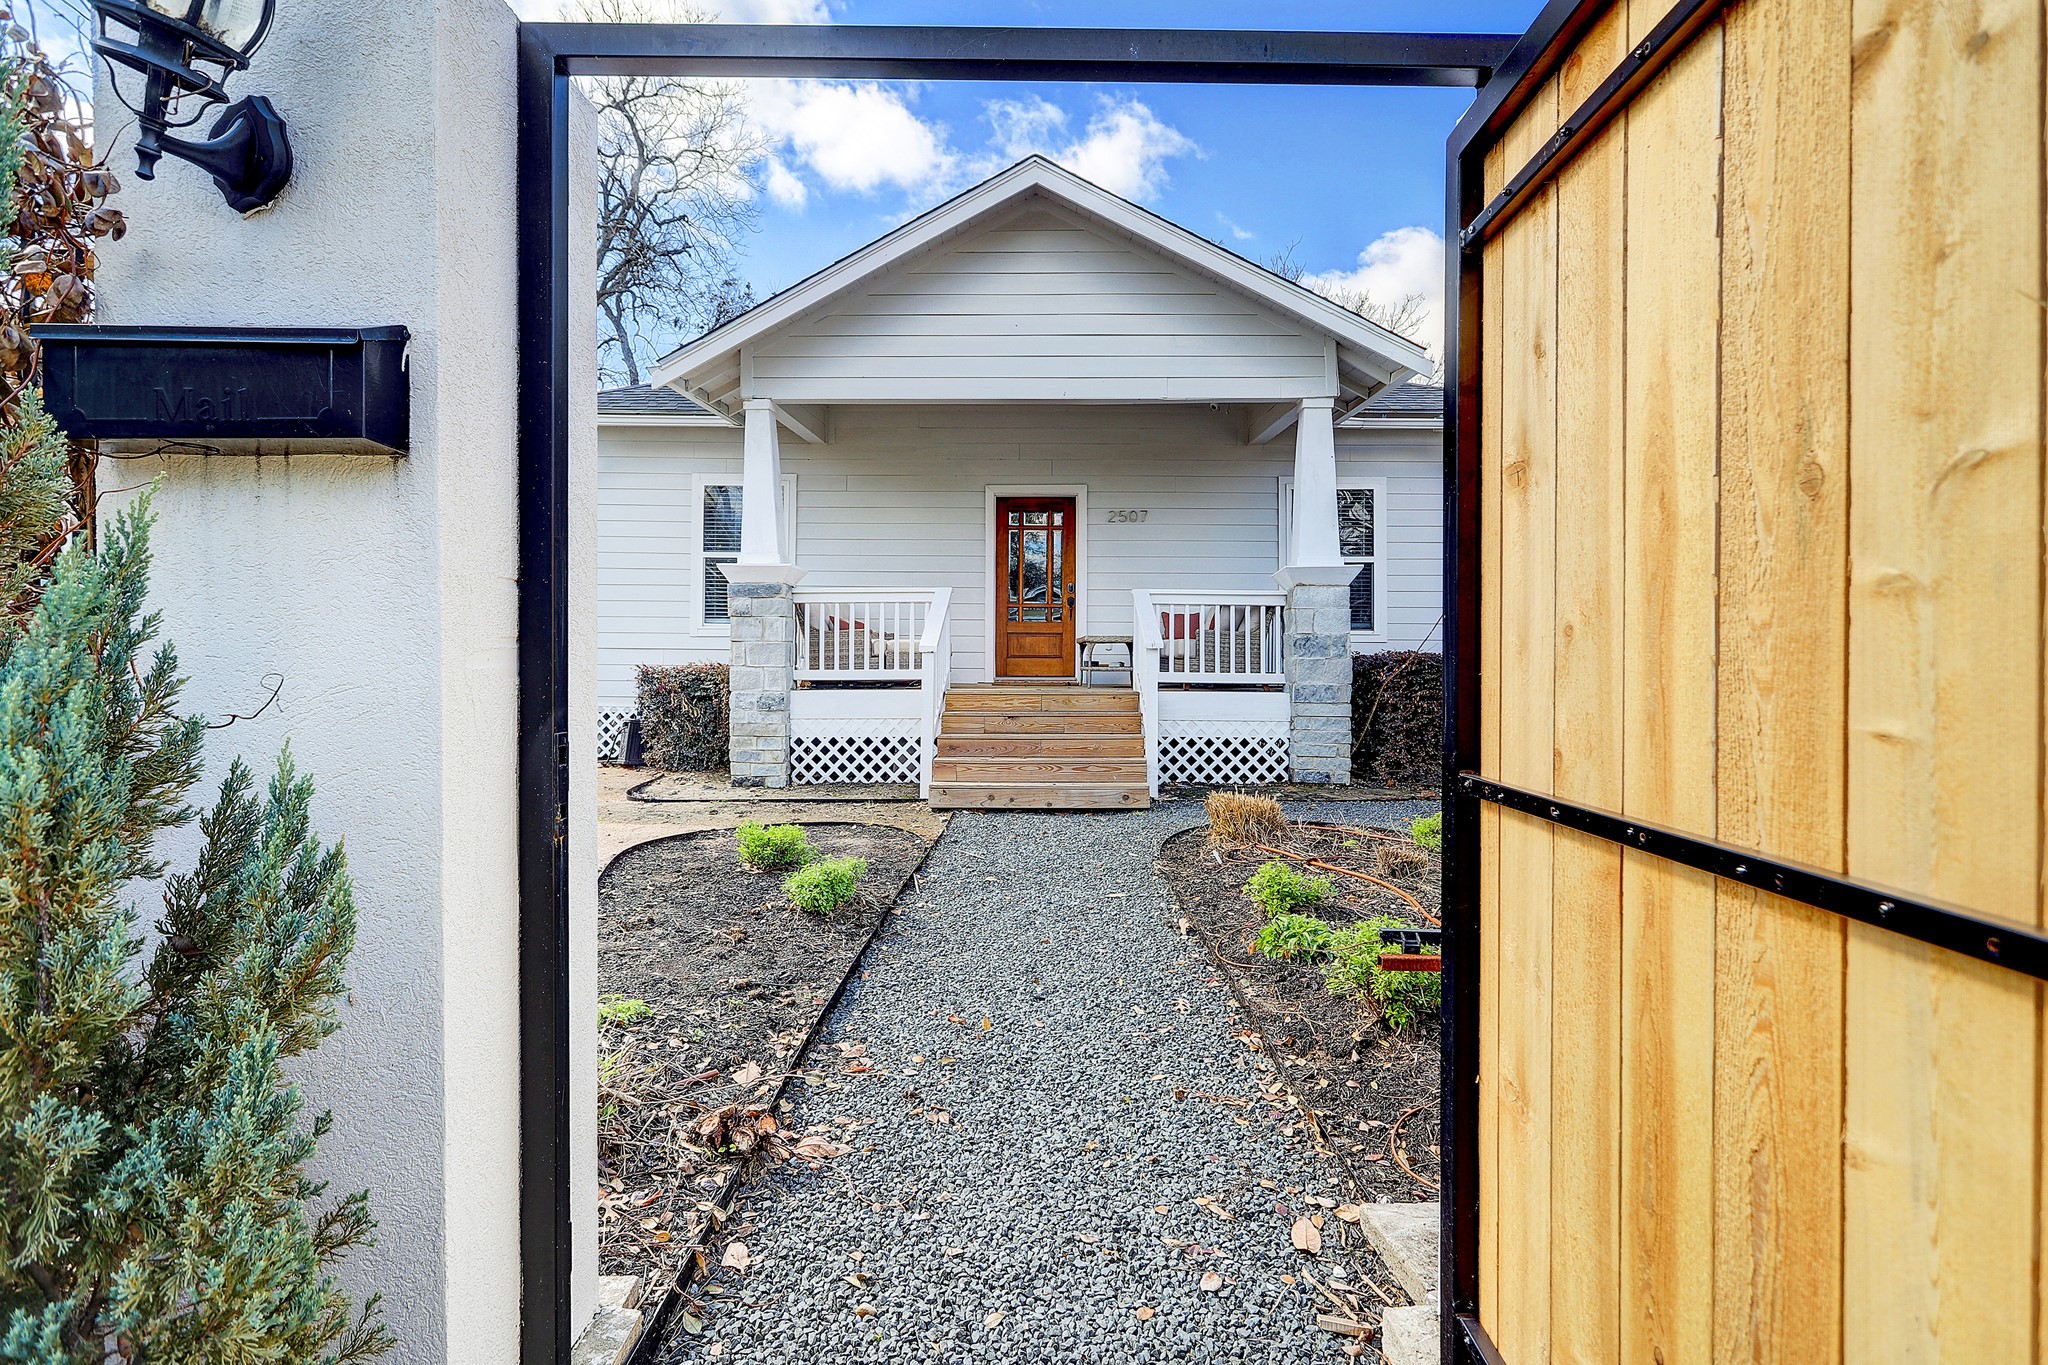 2507 Everett is seated behind a privacy fence, custom steel pedestrian gate, and automatic driveway gate.